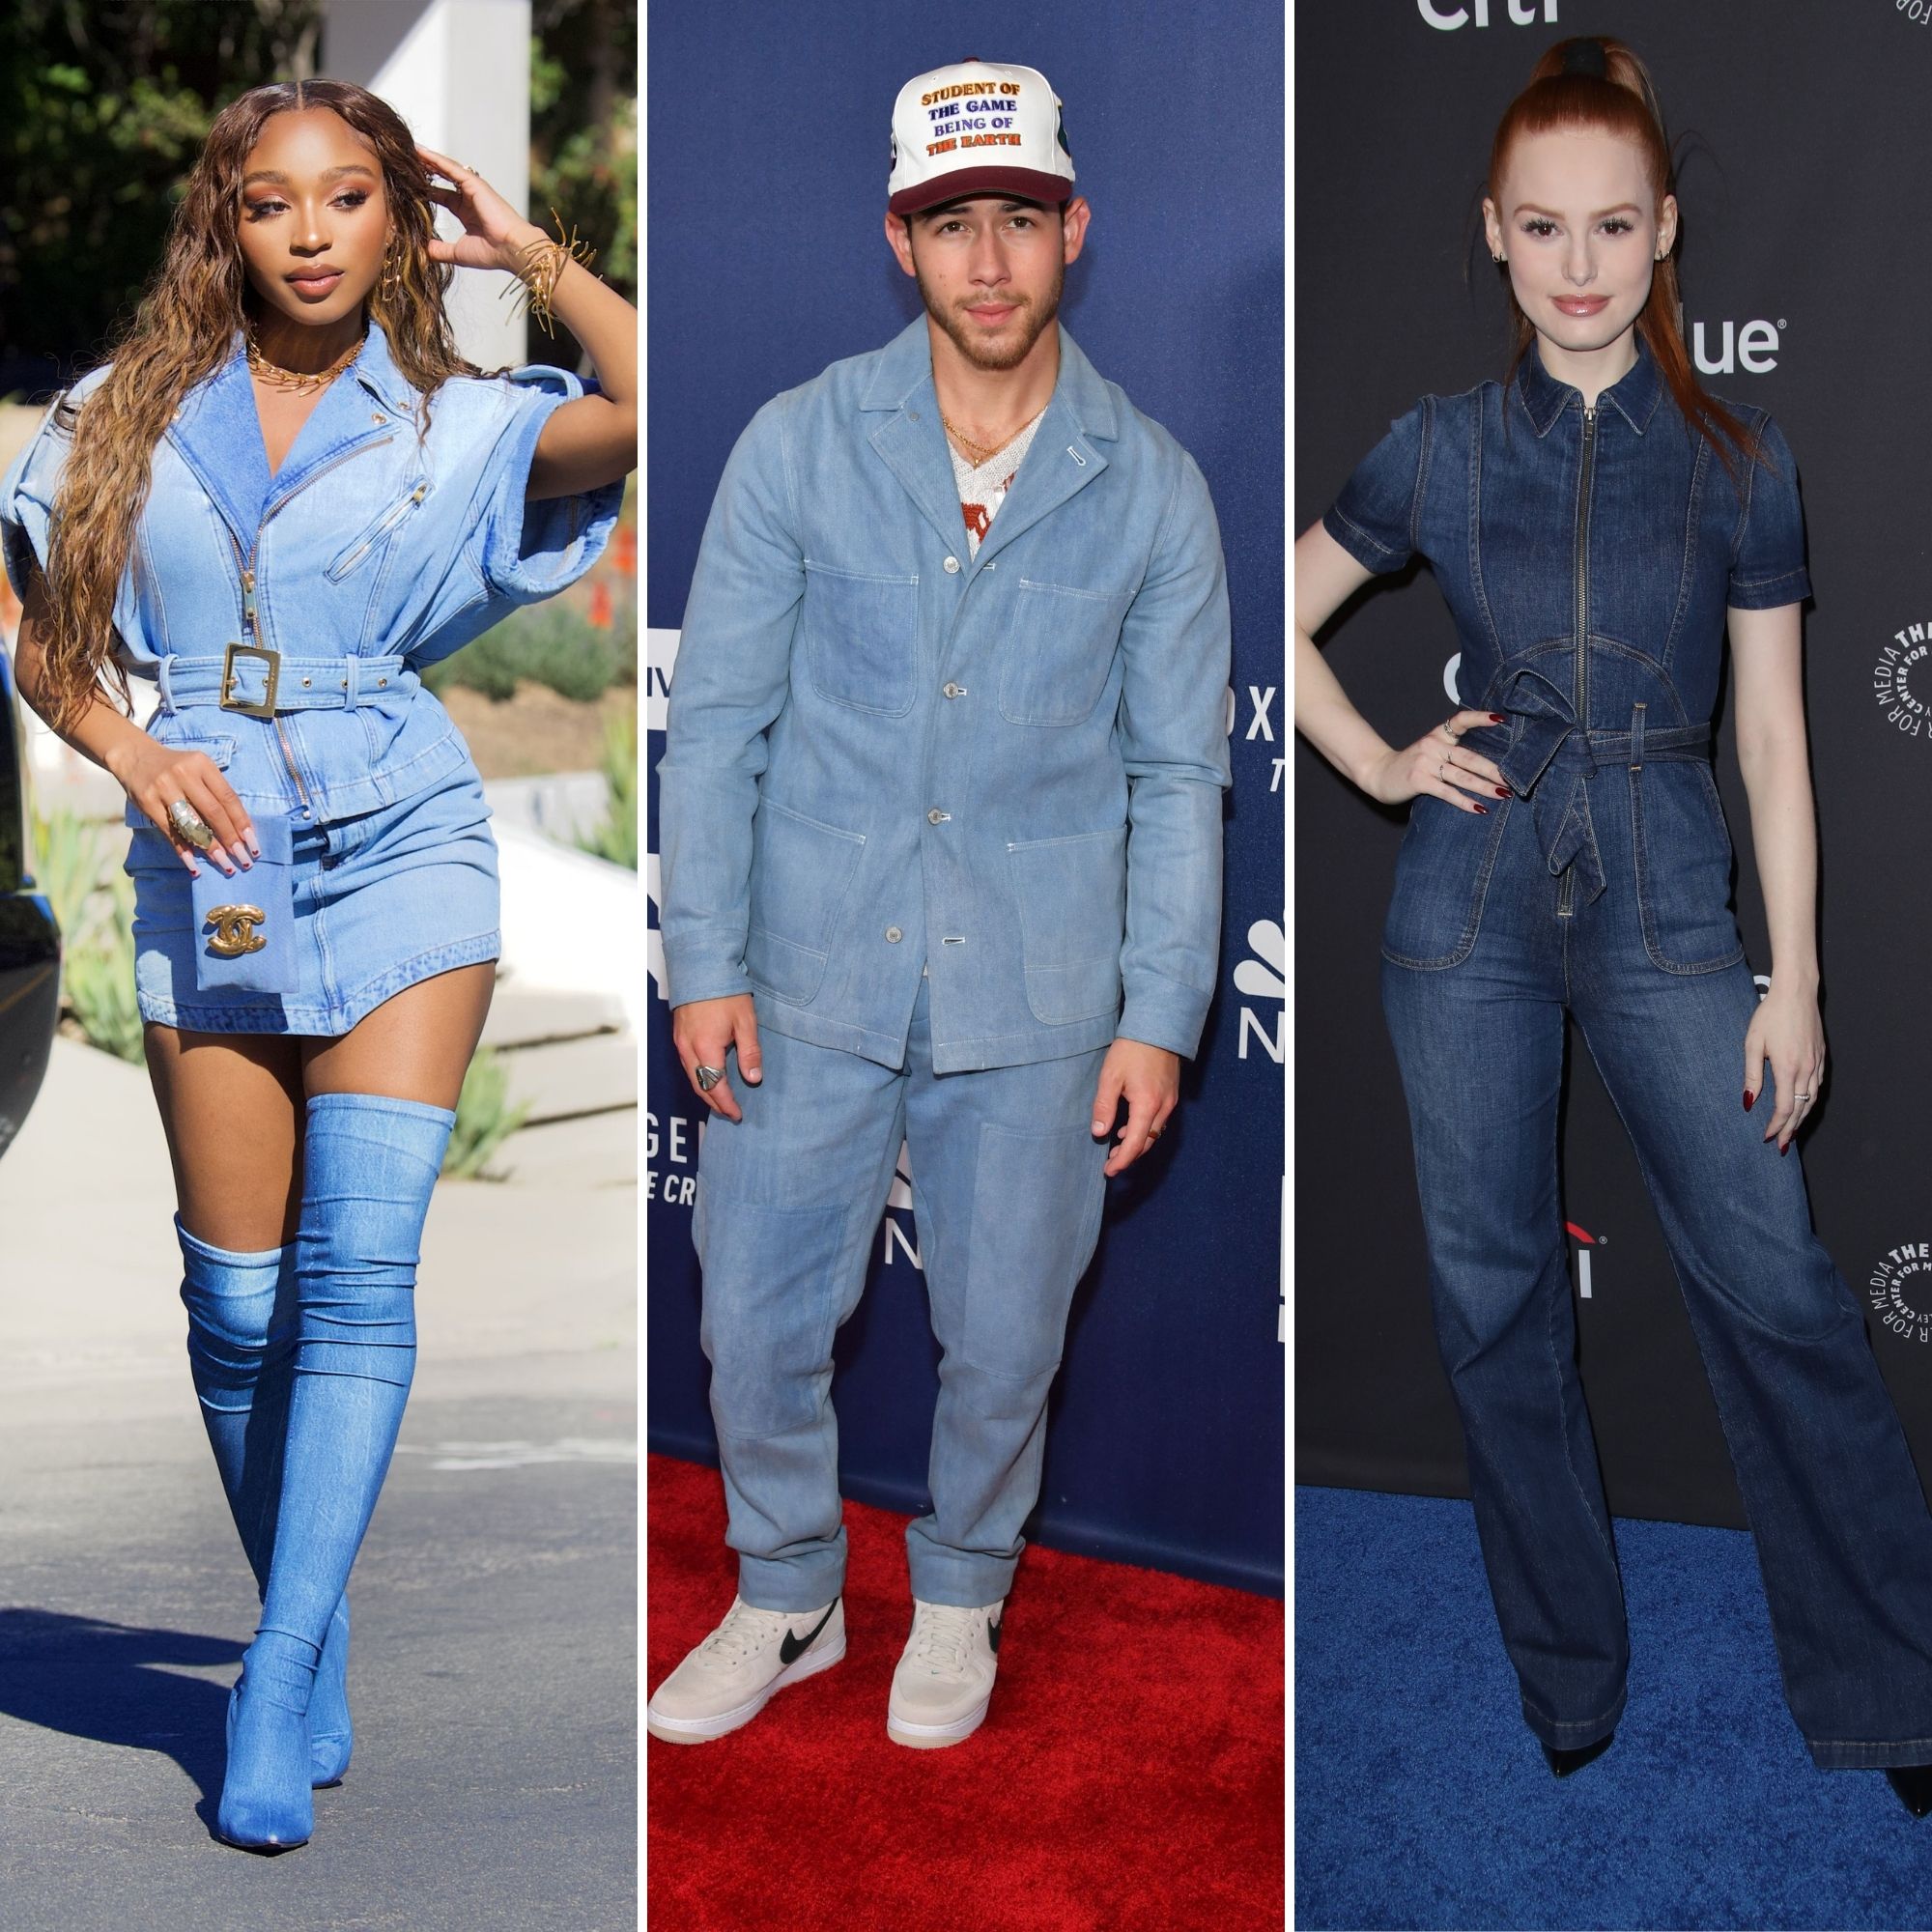 Celebrity Look for Less : How to Style Red Jeans 